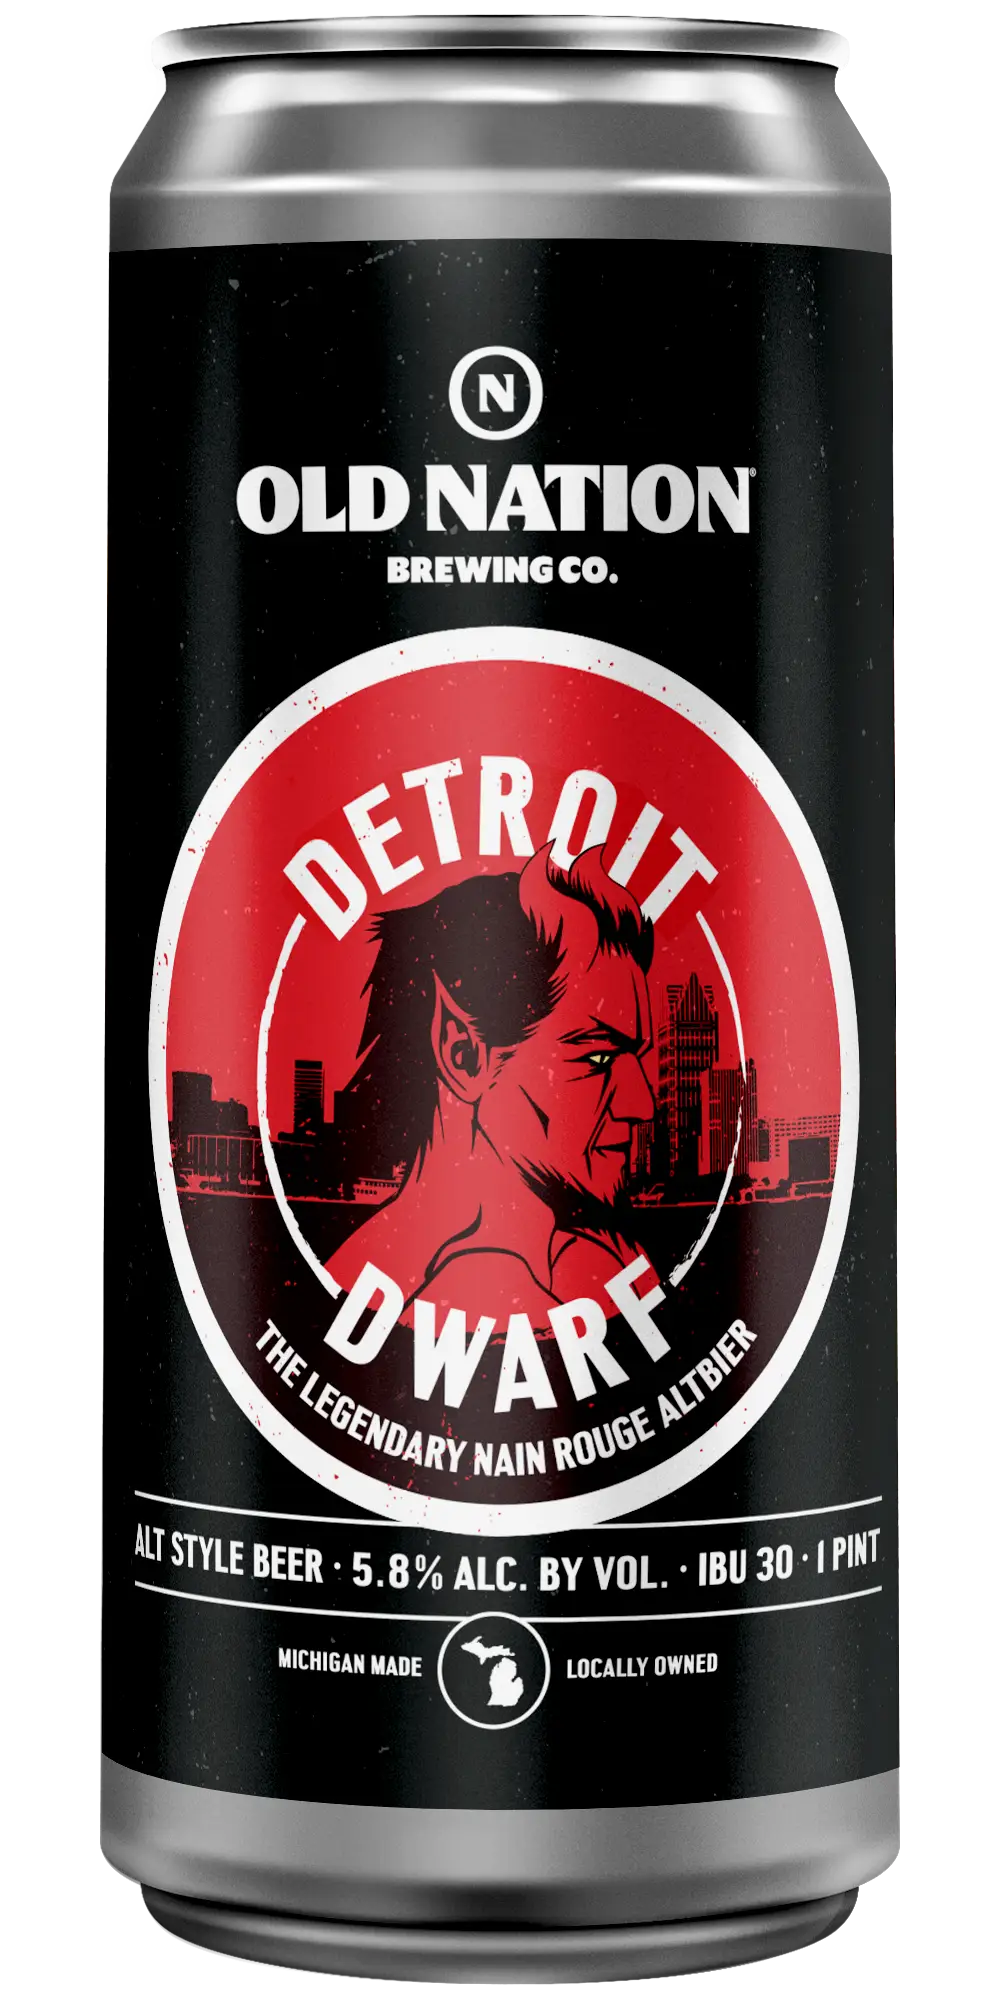 Old Nation Detroit Dwarf beer in an aluminum can. Drawing of the Detroit Dwarf on can label.